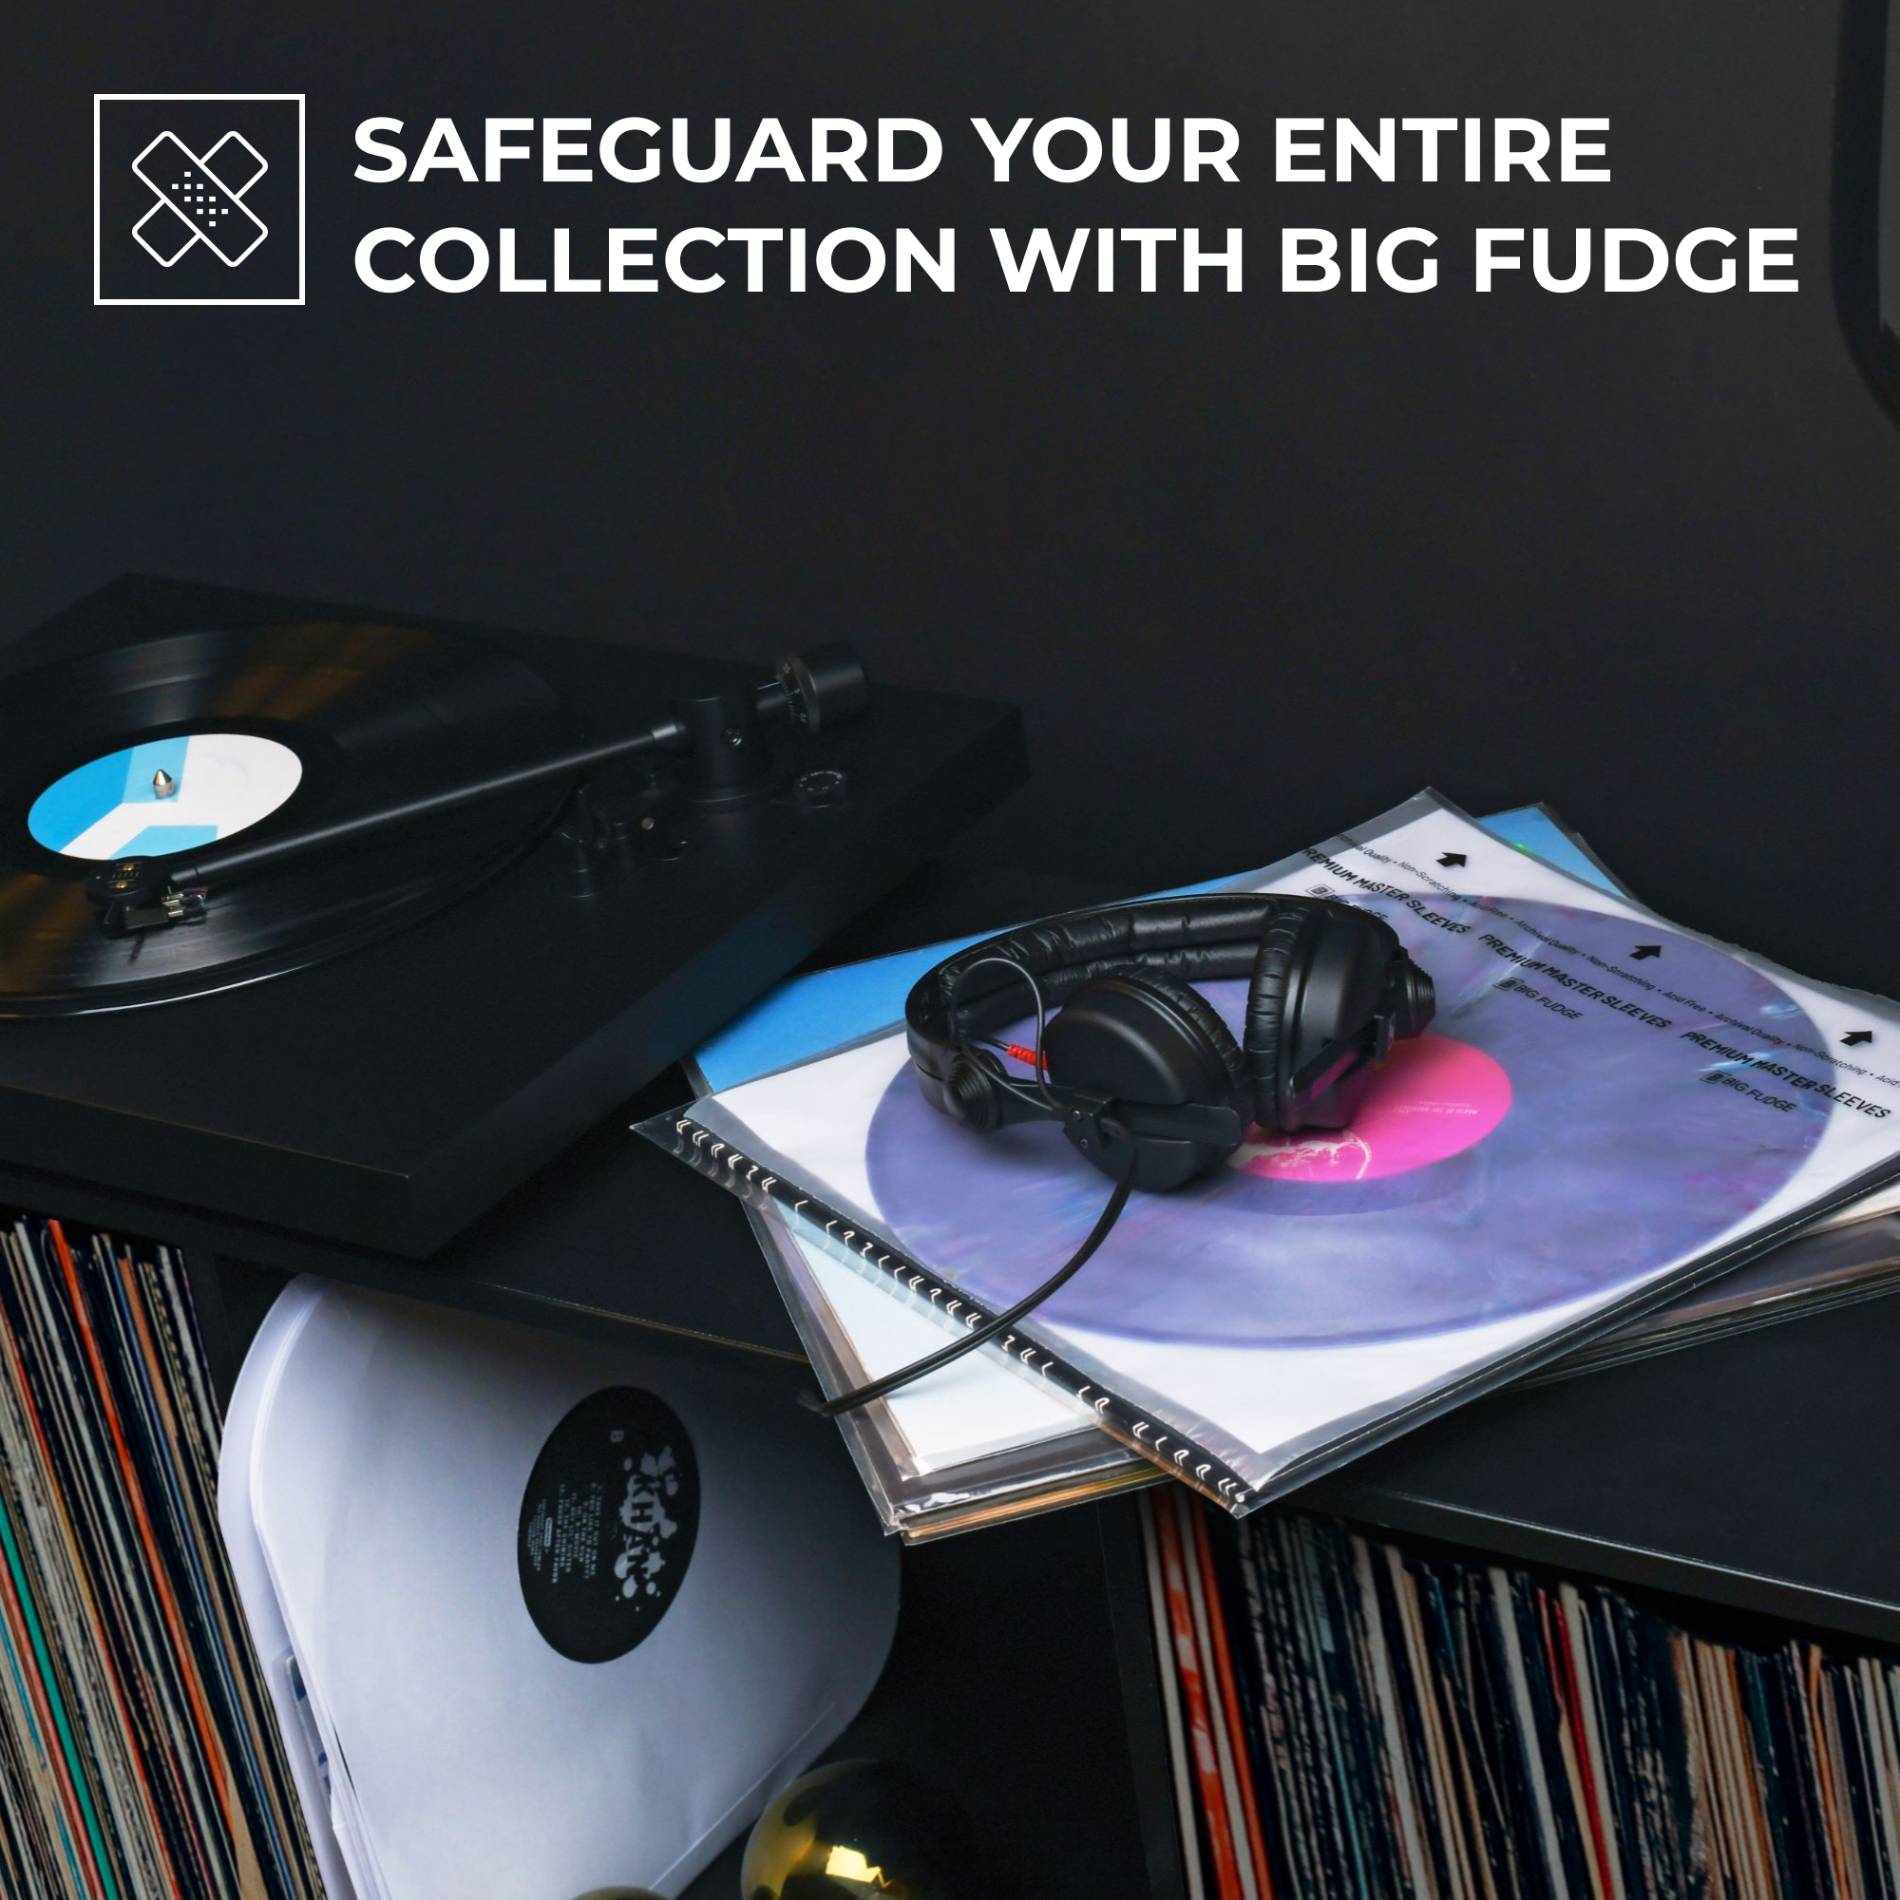 Safegaurd your entire collection with big fudge